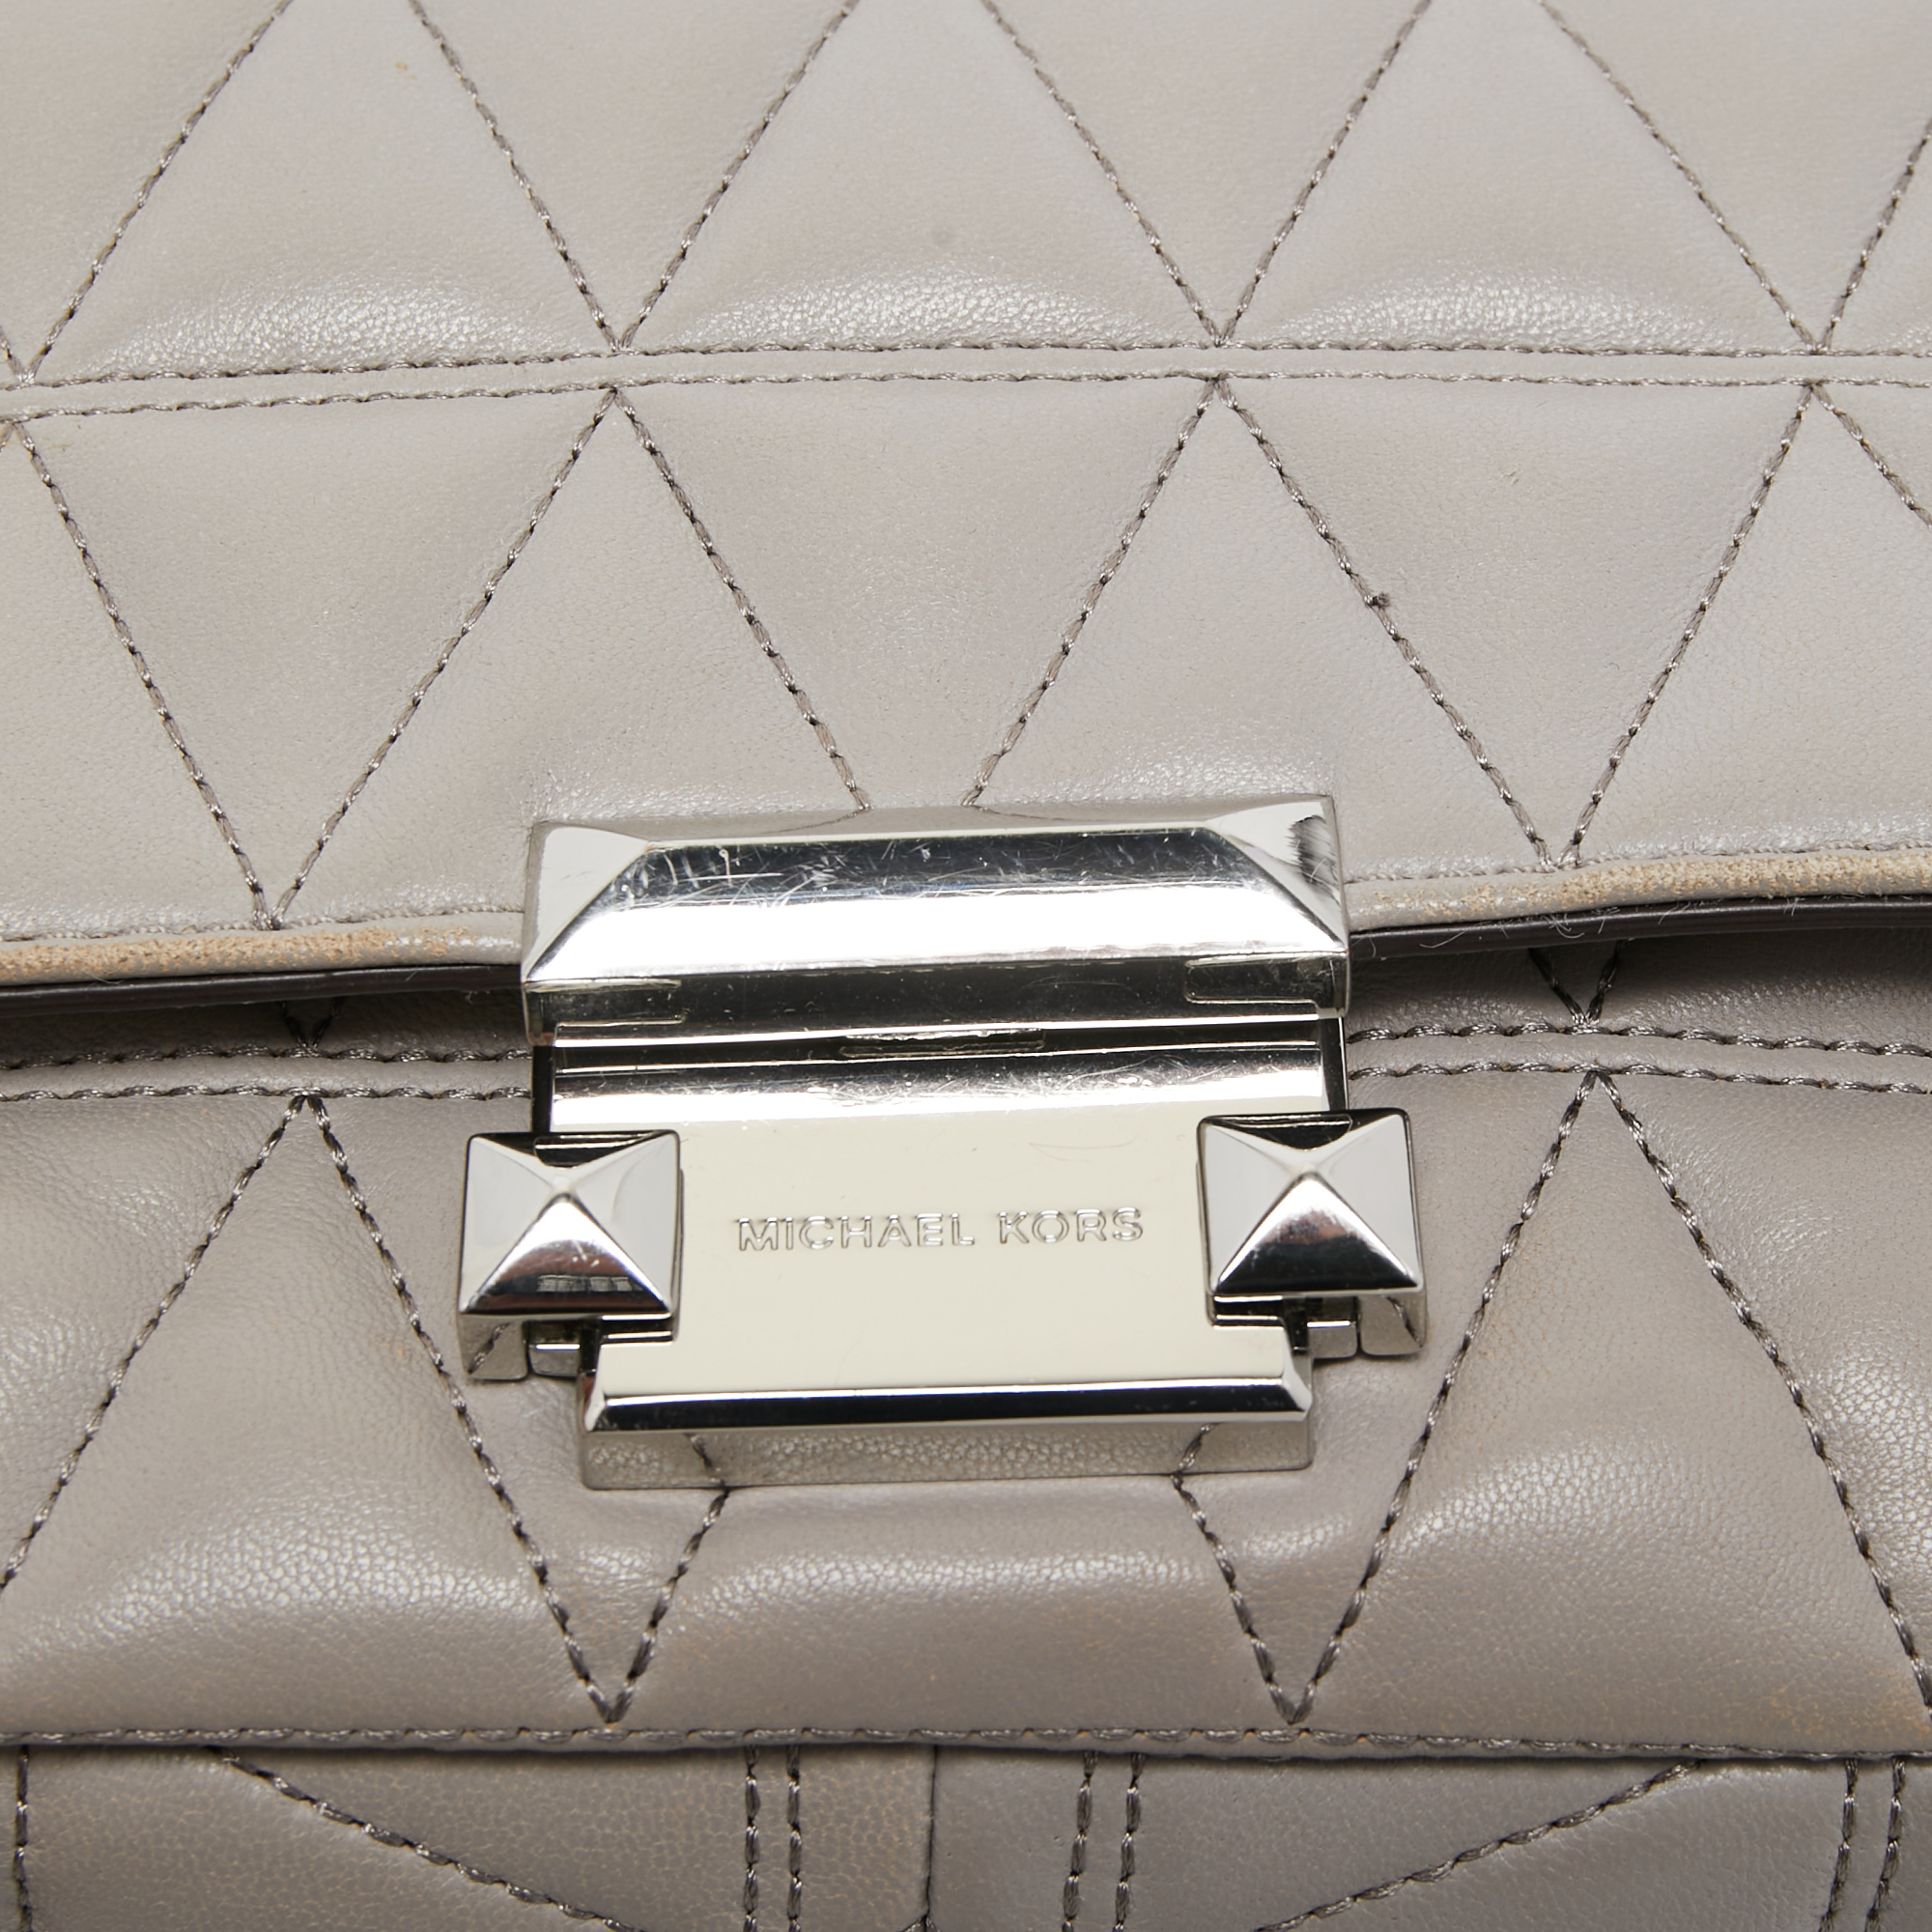 Michael Kors Grey Quilted Leather Small Sloan Studded Chain Shoulder Bag